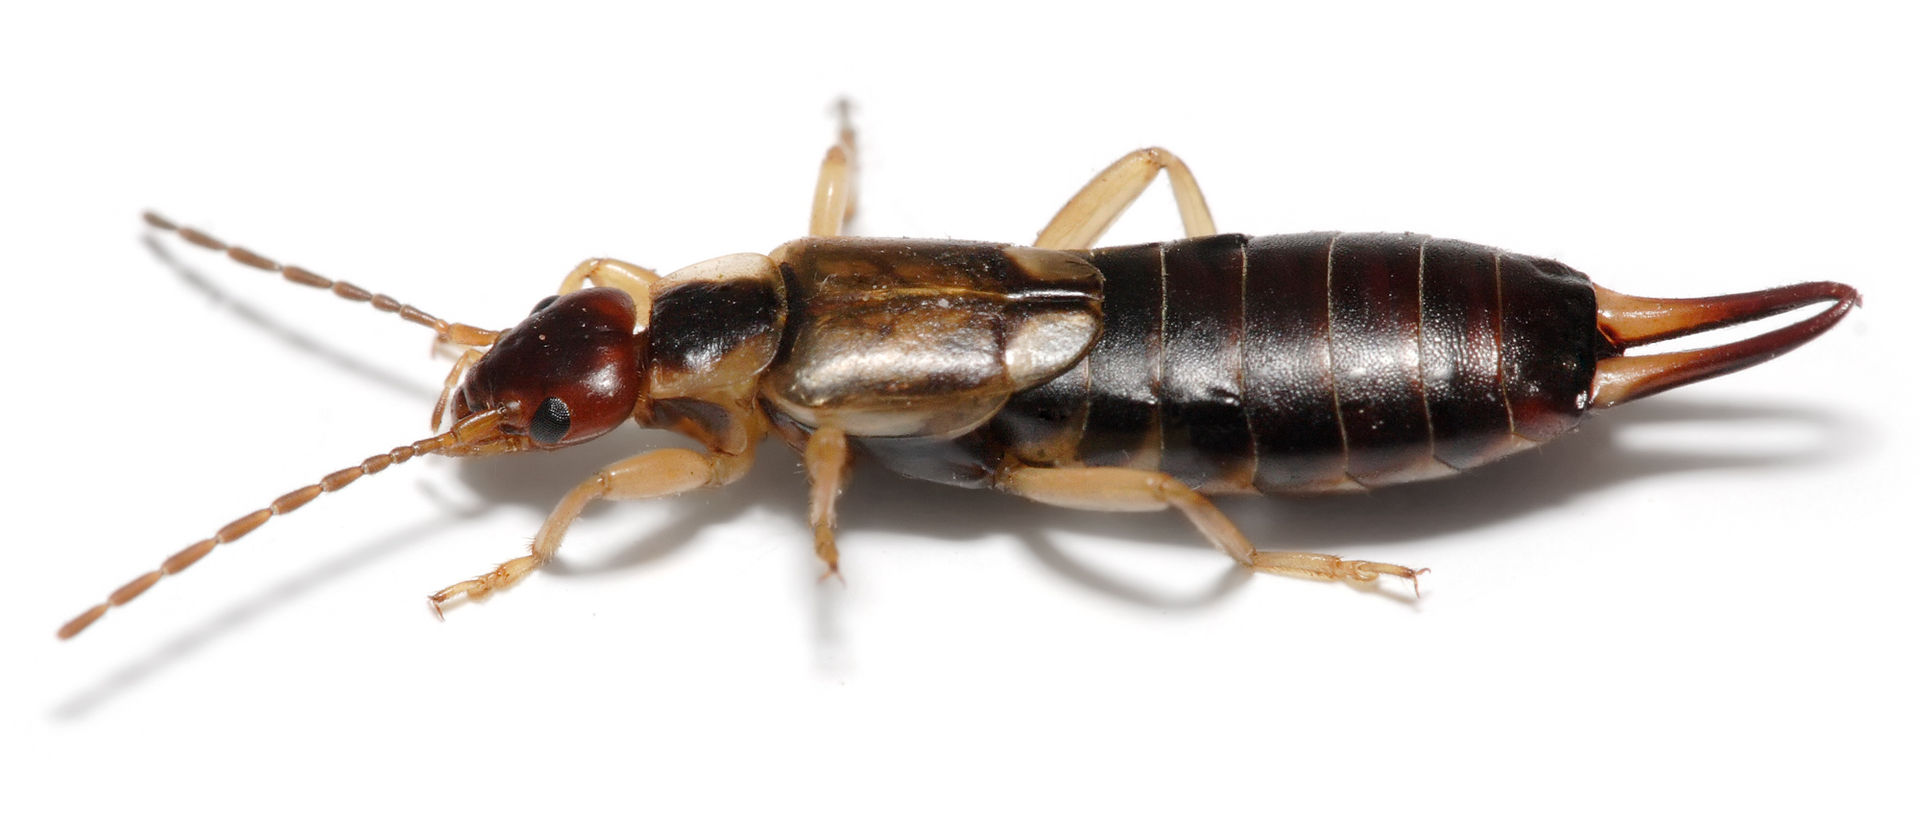 Earwigs:  While it is a rarity, earwigs have been known from times to time to come hang out in your ear canal just to freak you out.